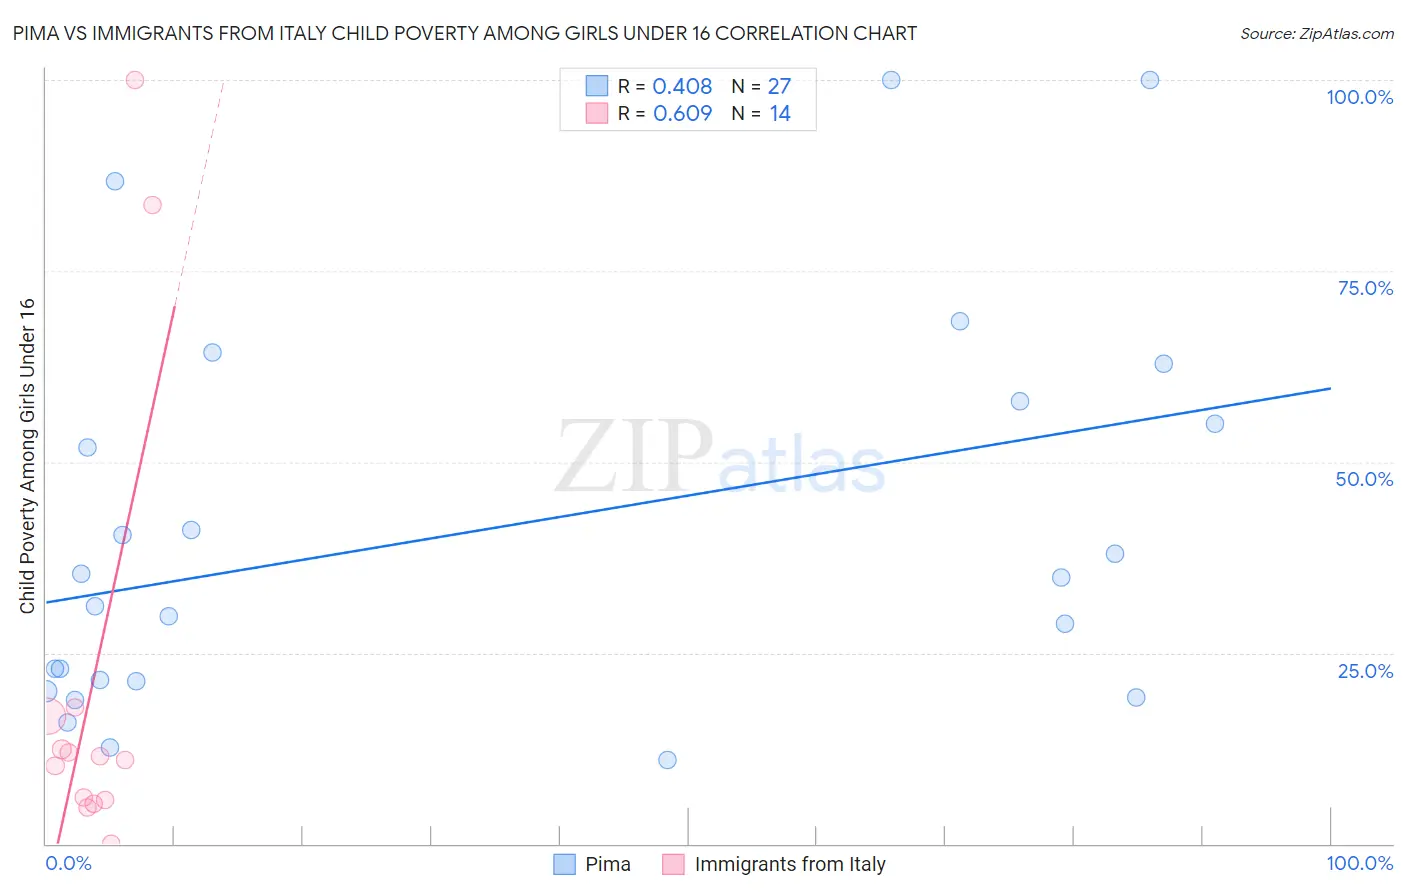 Pima vs Immigrants from Italy Child Poverty Among Girls Under 16